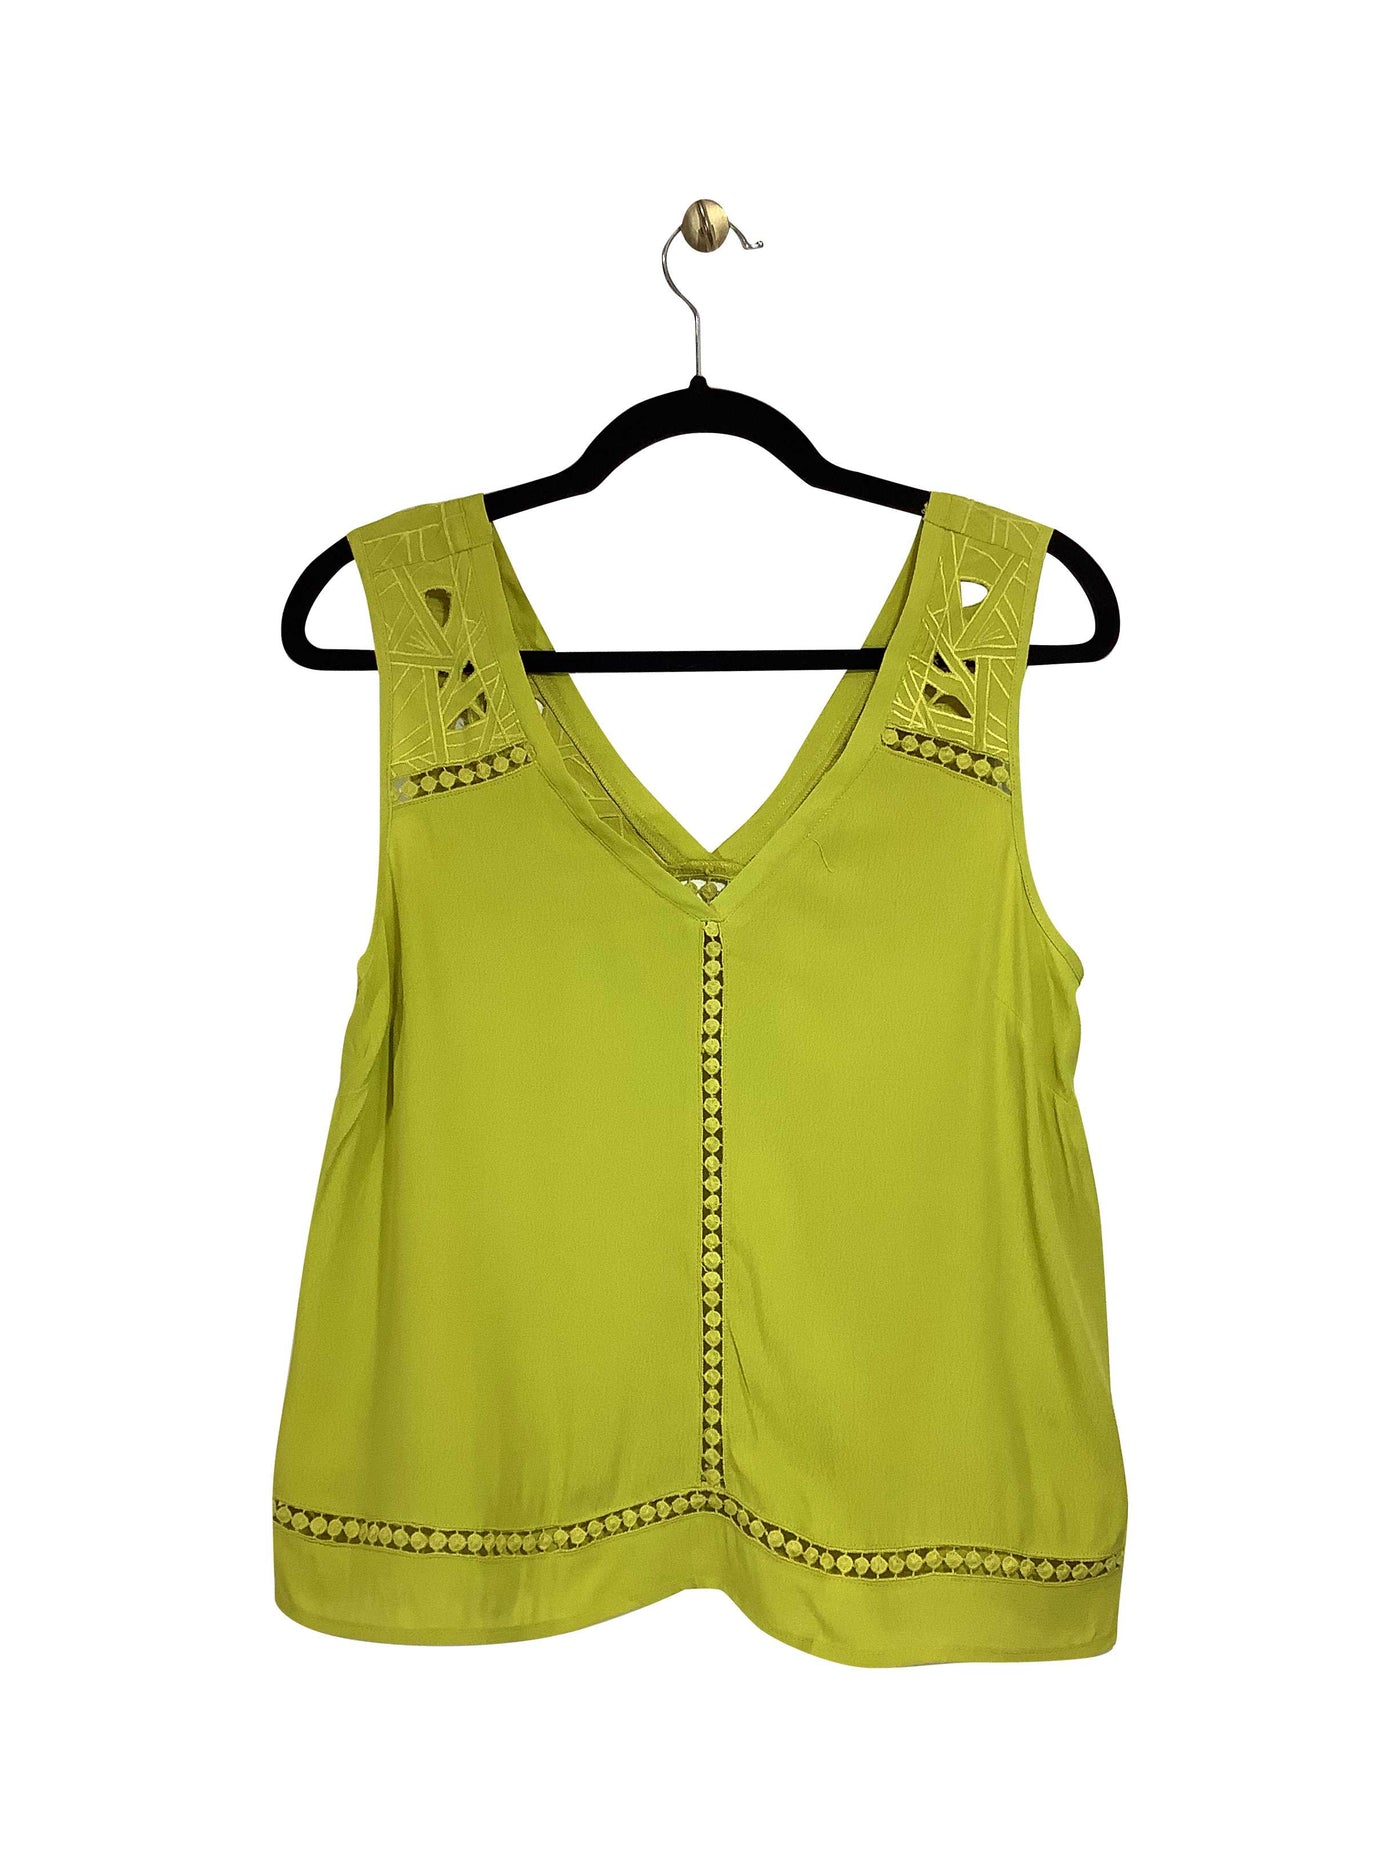 UNBRANDED Regular fit Blouse in Yellow - Size M | 12 $ KOOP